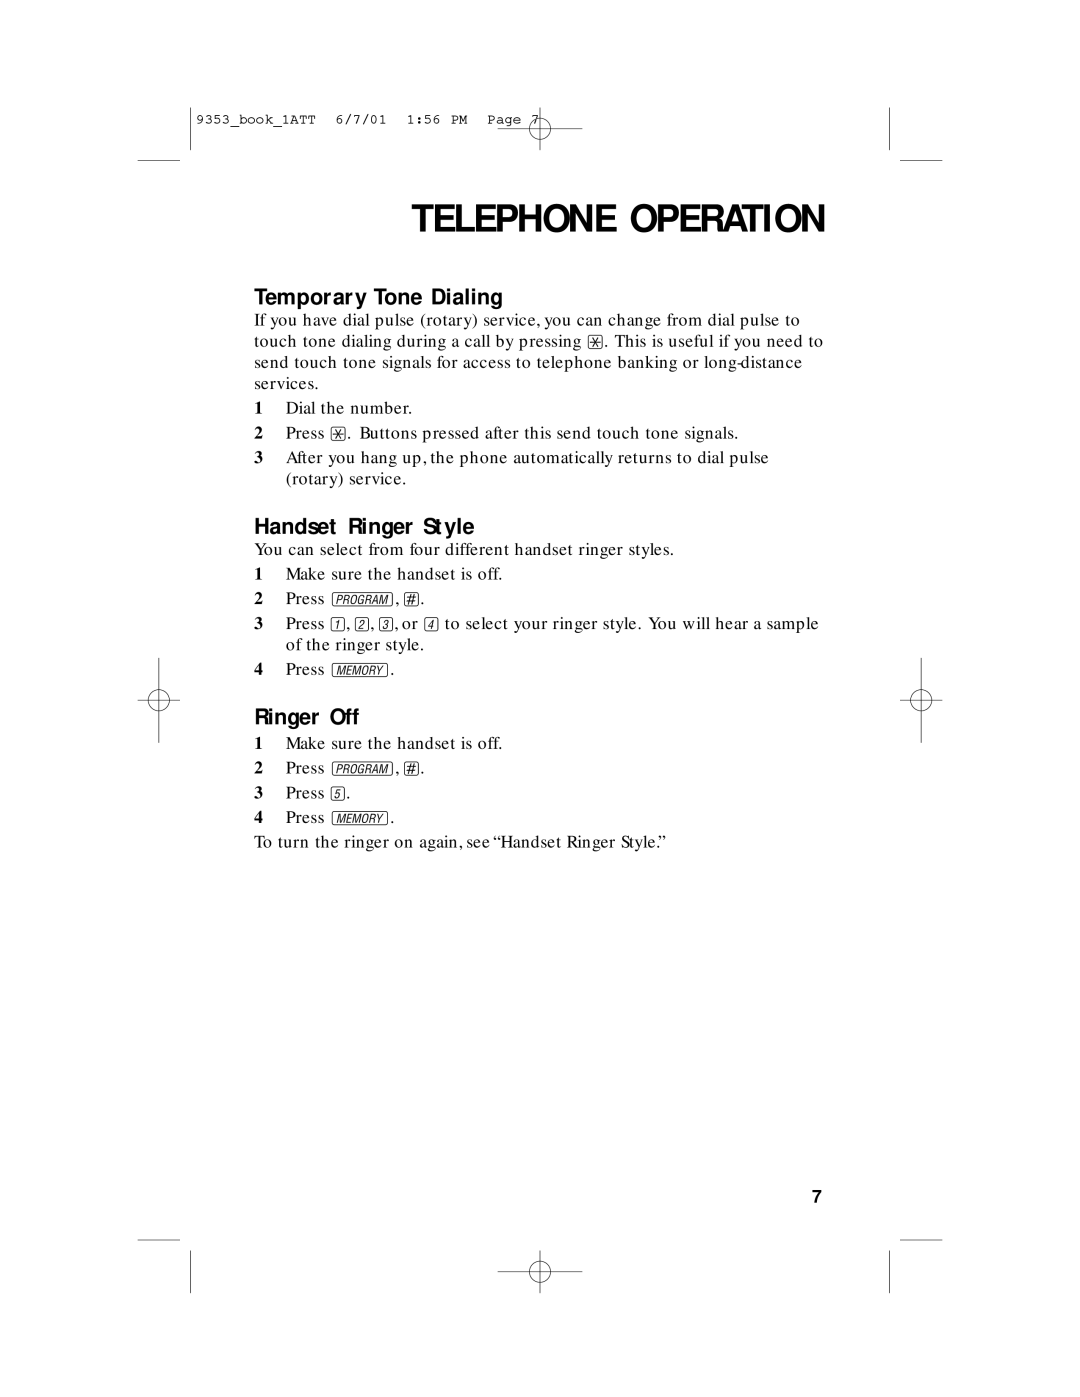 AT&T 9353 user manual Temporary Tone Dialing, Handset Ringer Style, Ringer Off, Telephone Operation 